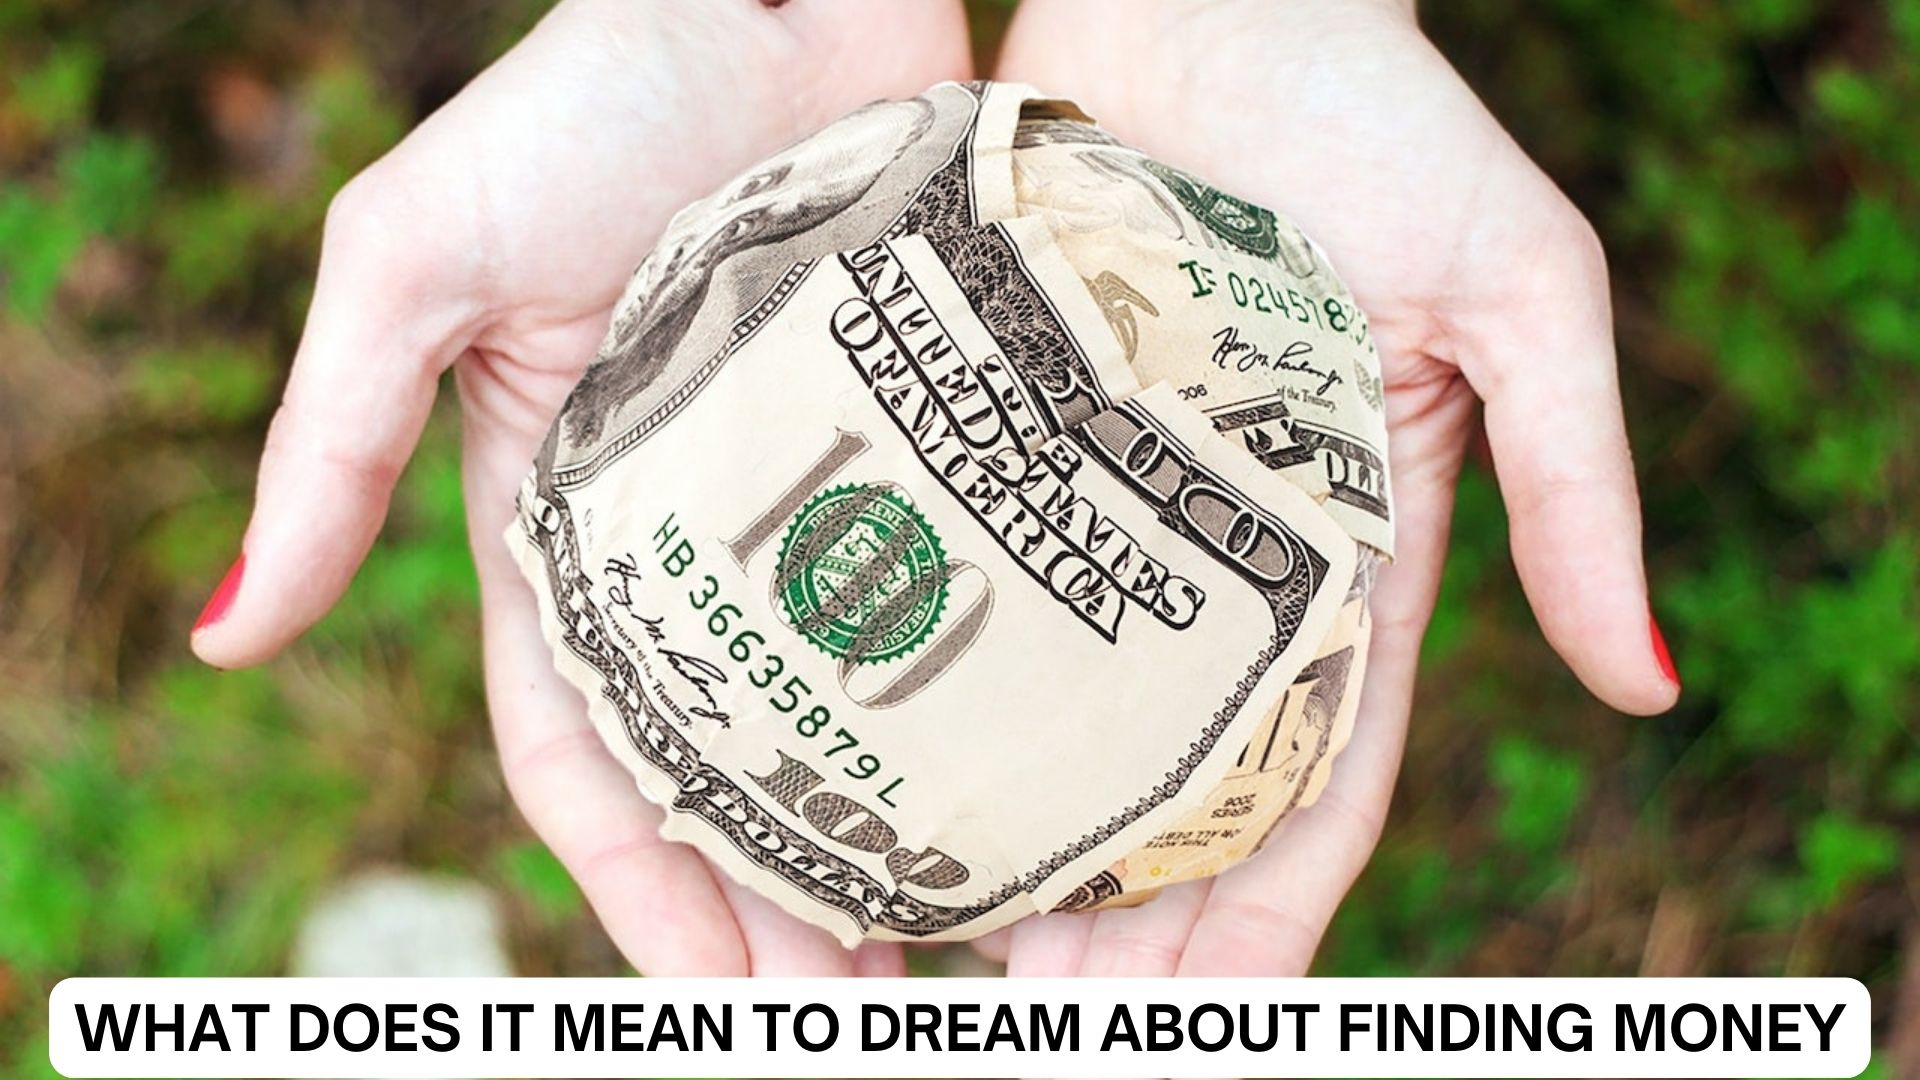 What Does It Mean To Dream About Finding Money?